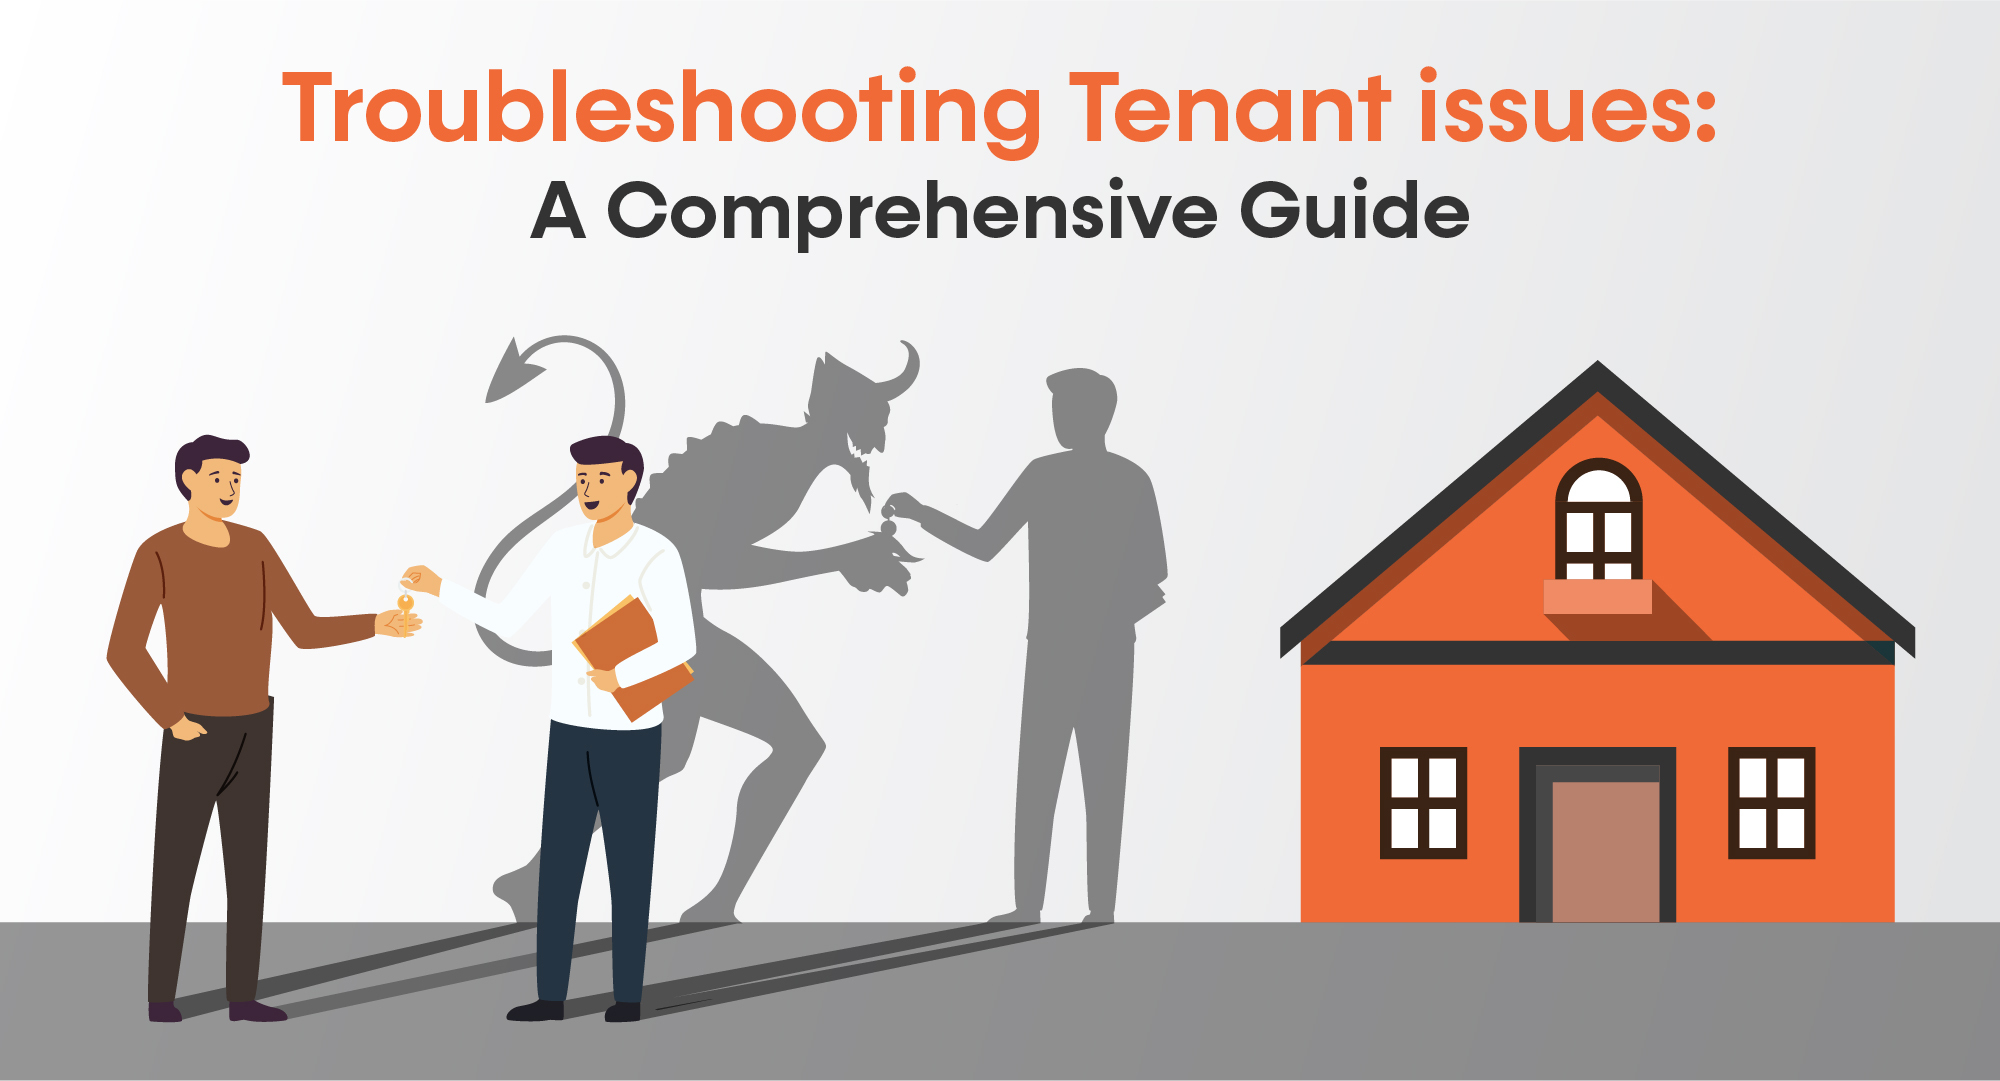 Troubleshooting Tenant issues: A Comprehensive Guide